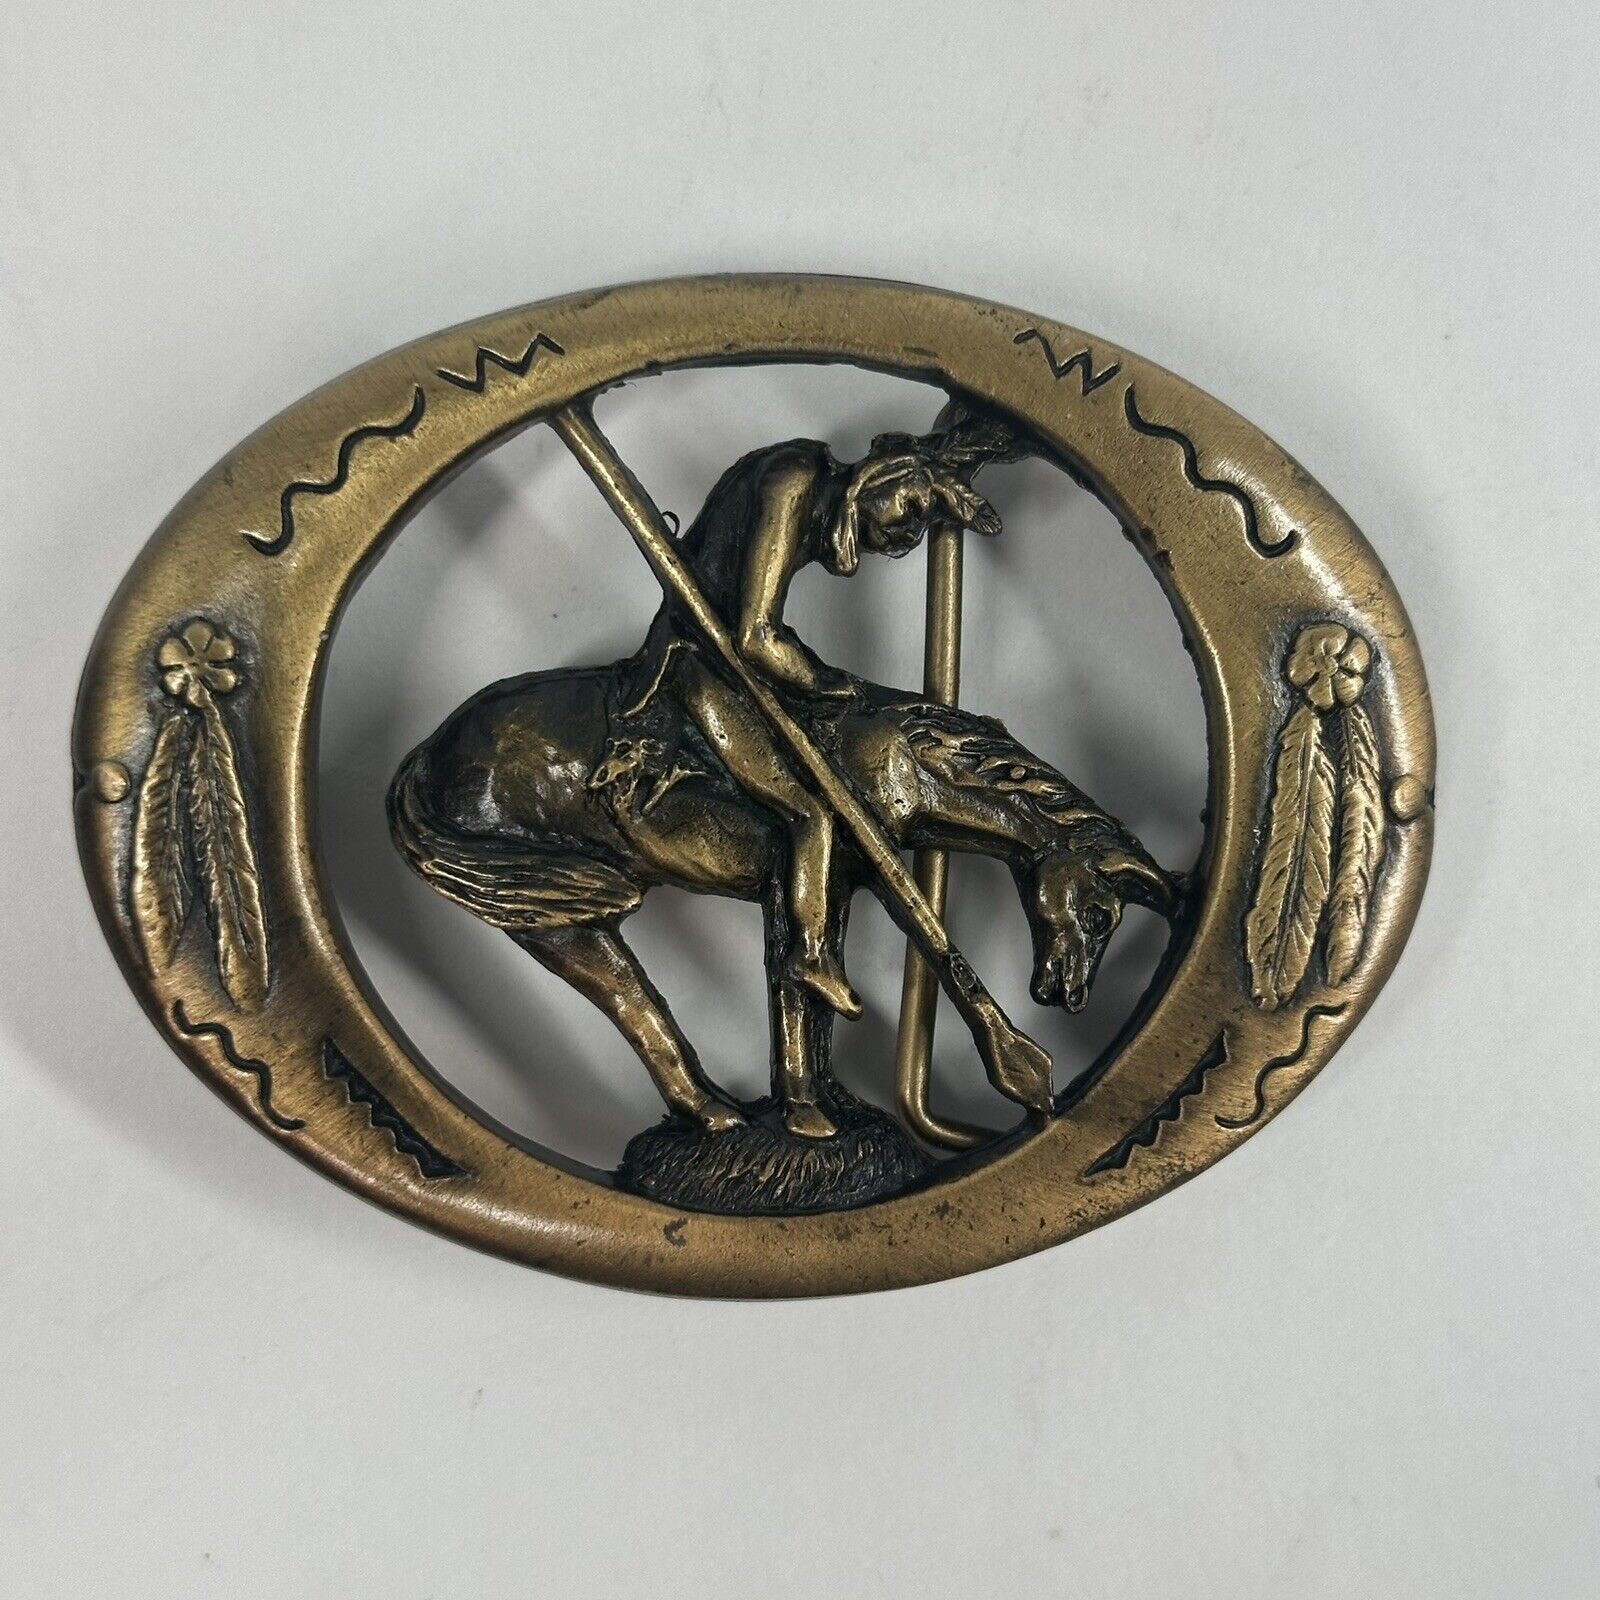 Montana Silversmiths Belt Buckle - End of The Trail 1992, Colorado Silver Star